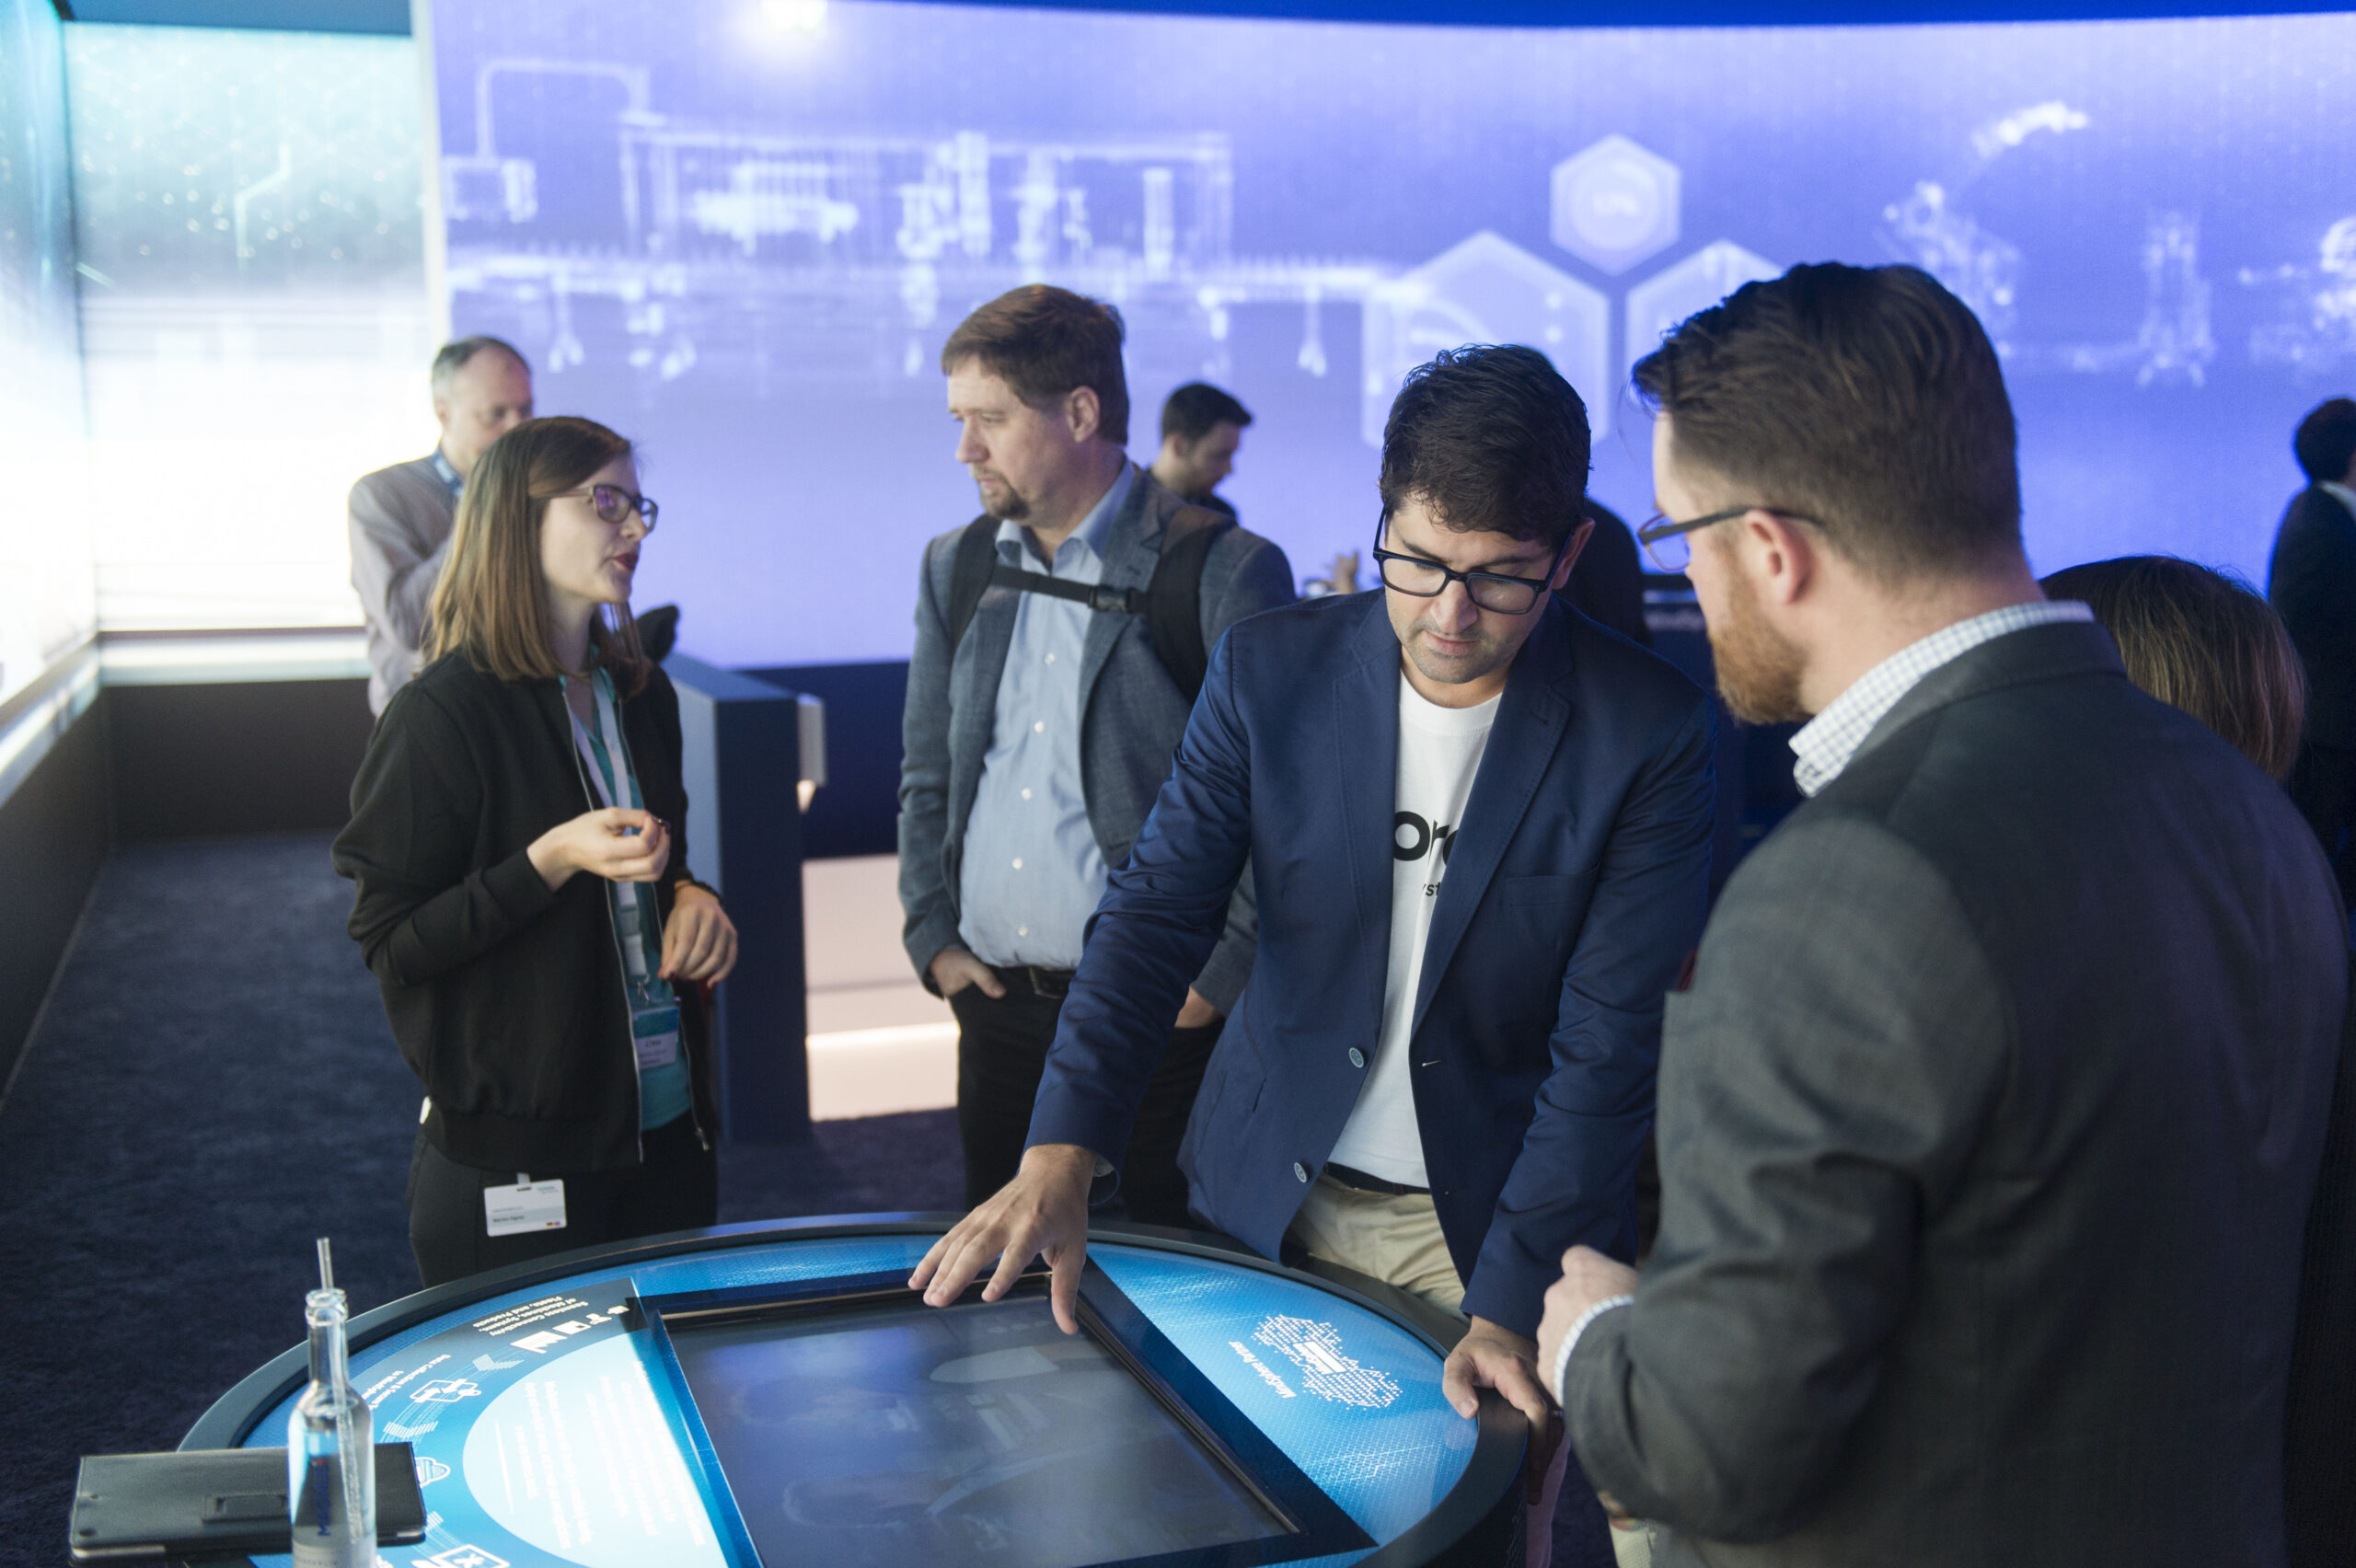 Group standing around a touch screen embedded in a round table